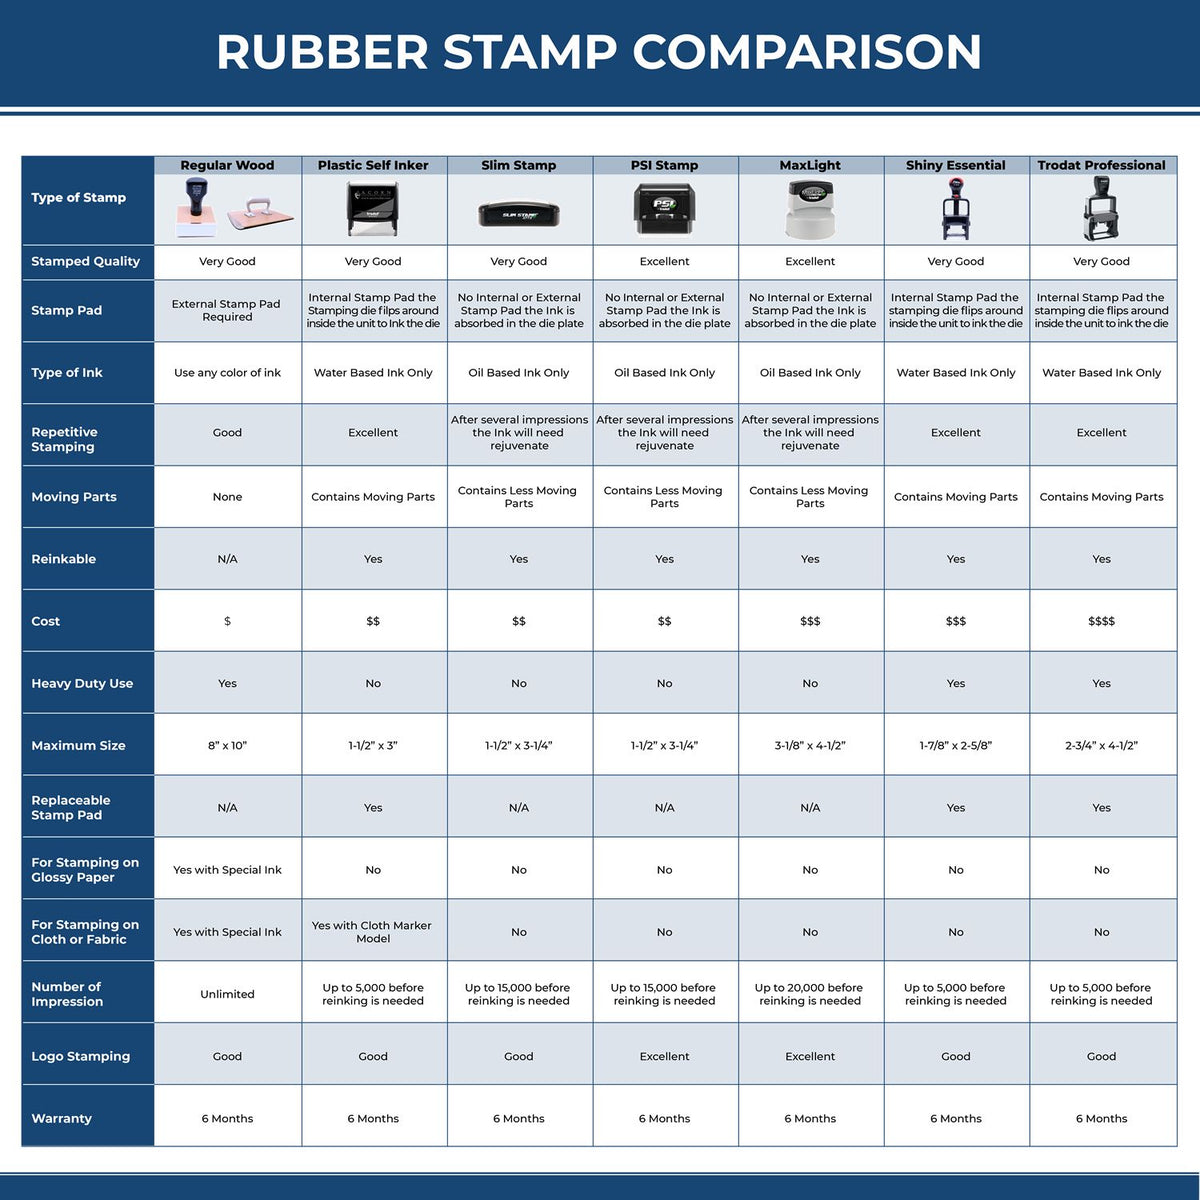 A comparison chart for the different types of mount models available for the PSI Oklahoma Notary Stamp.